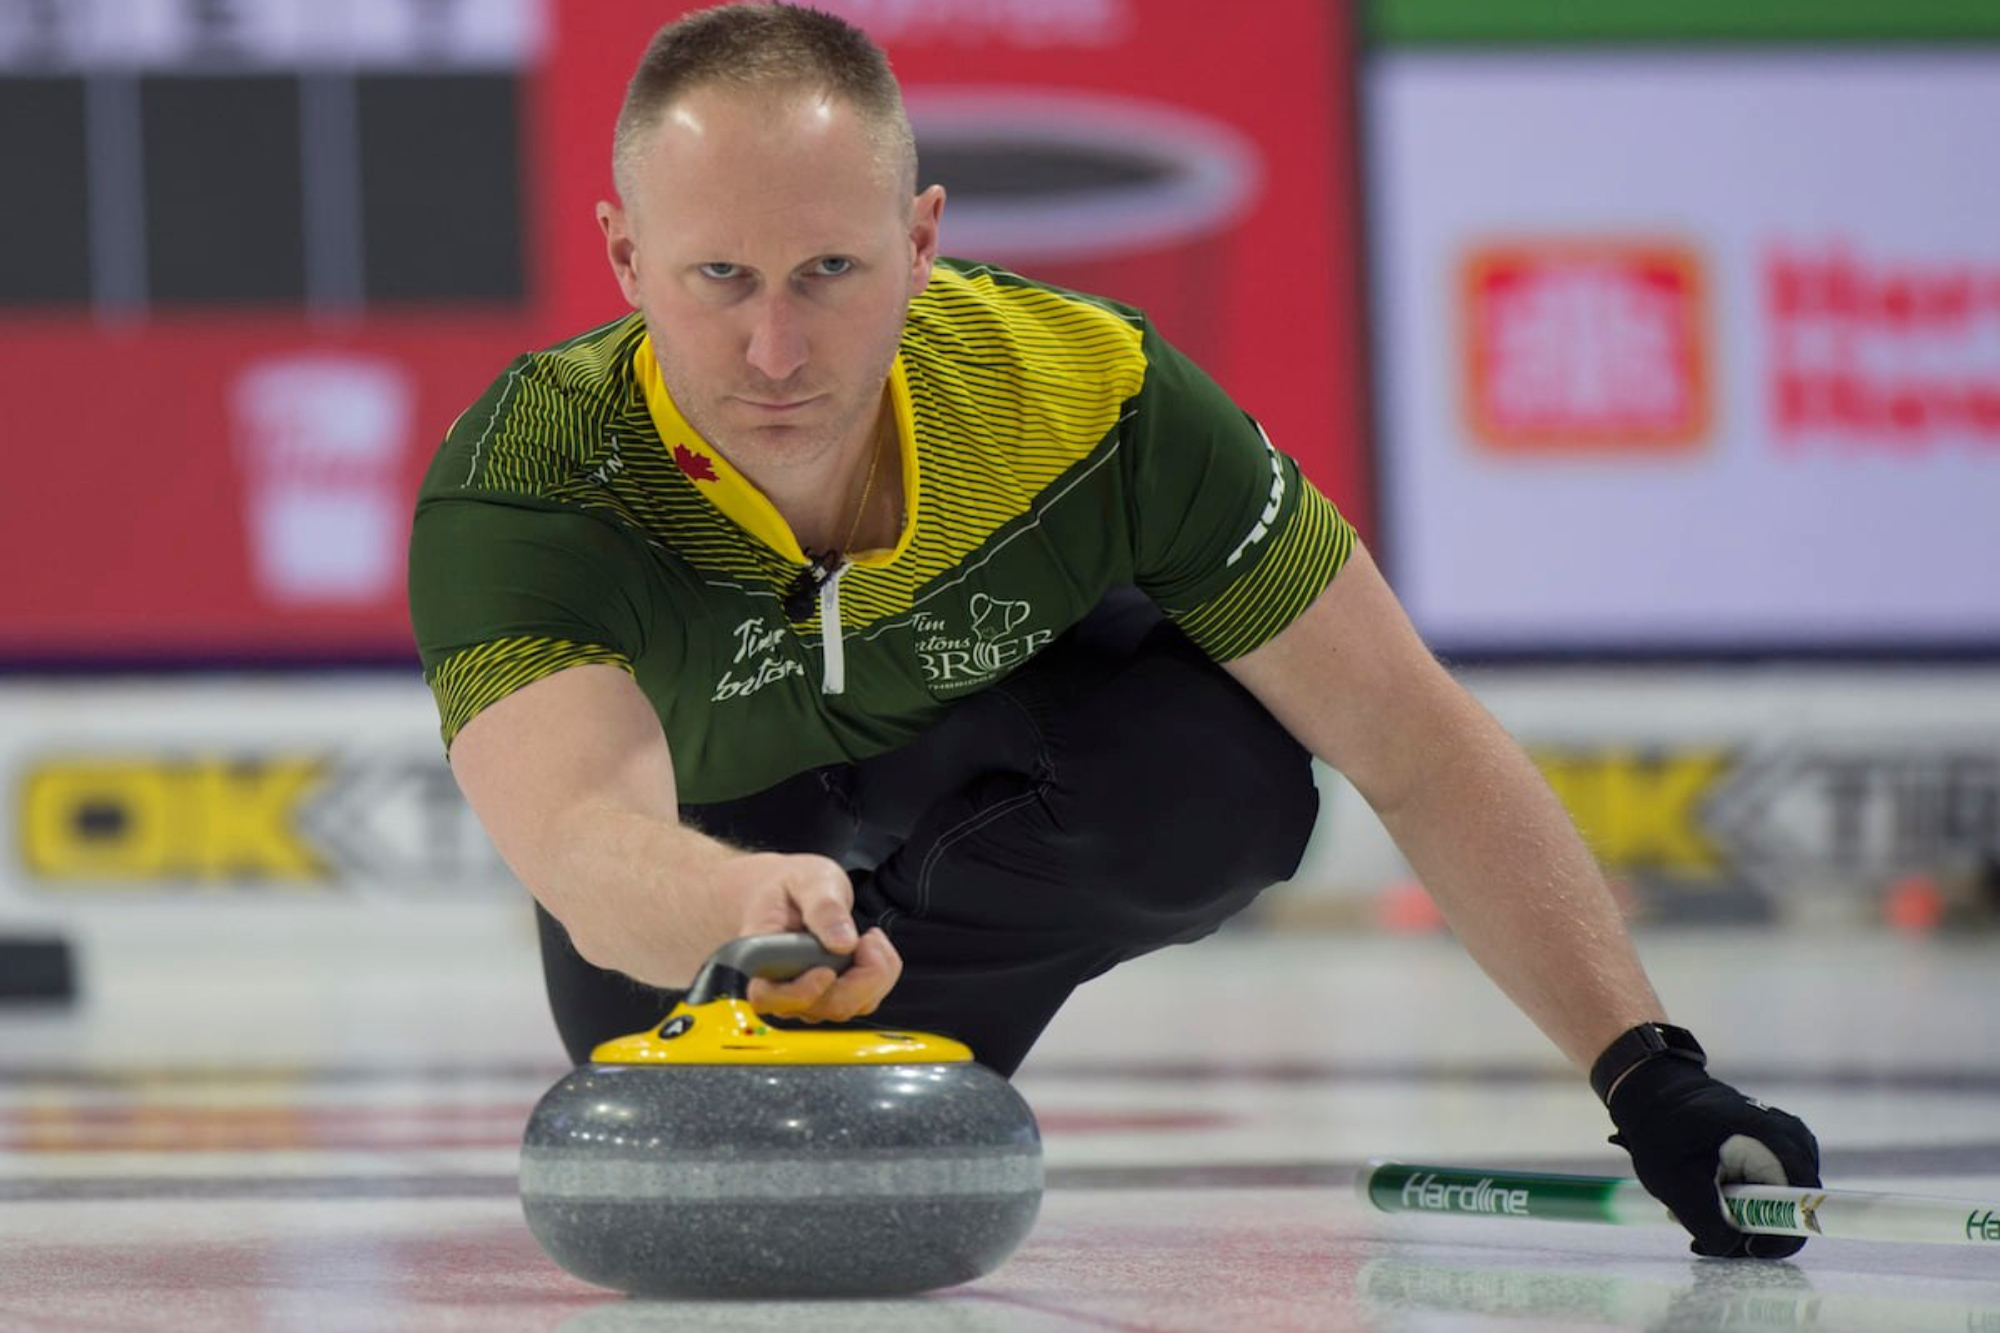 Jacobs returning to competitive curling full-time next season